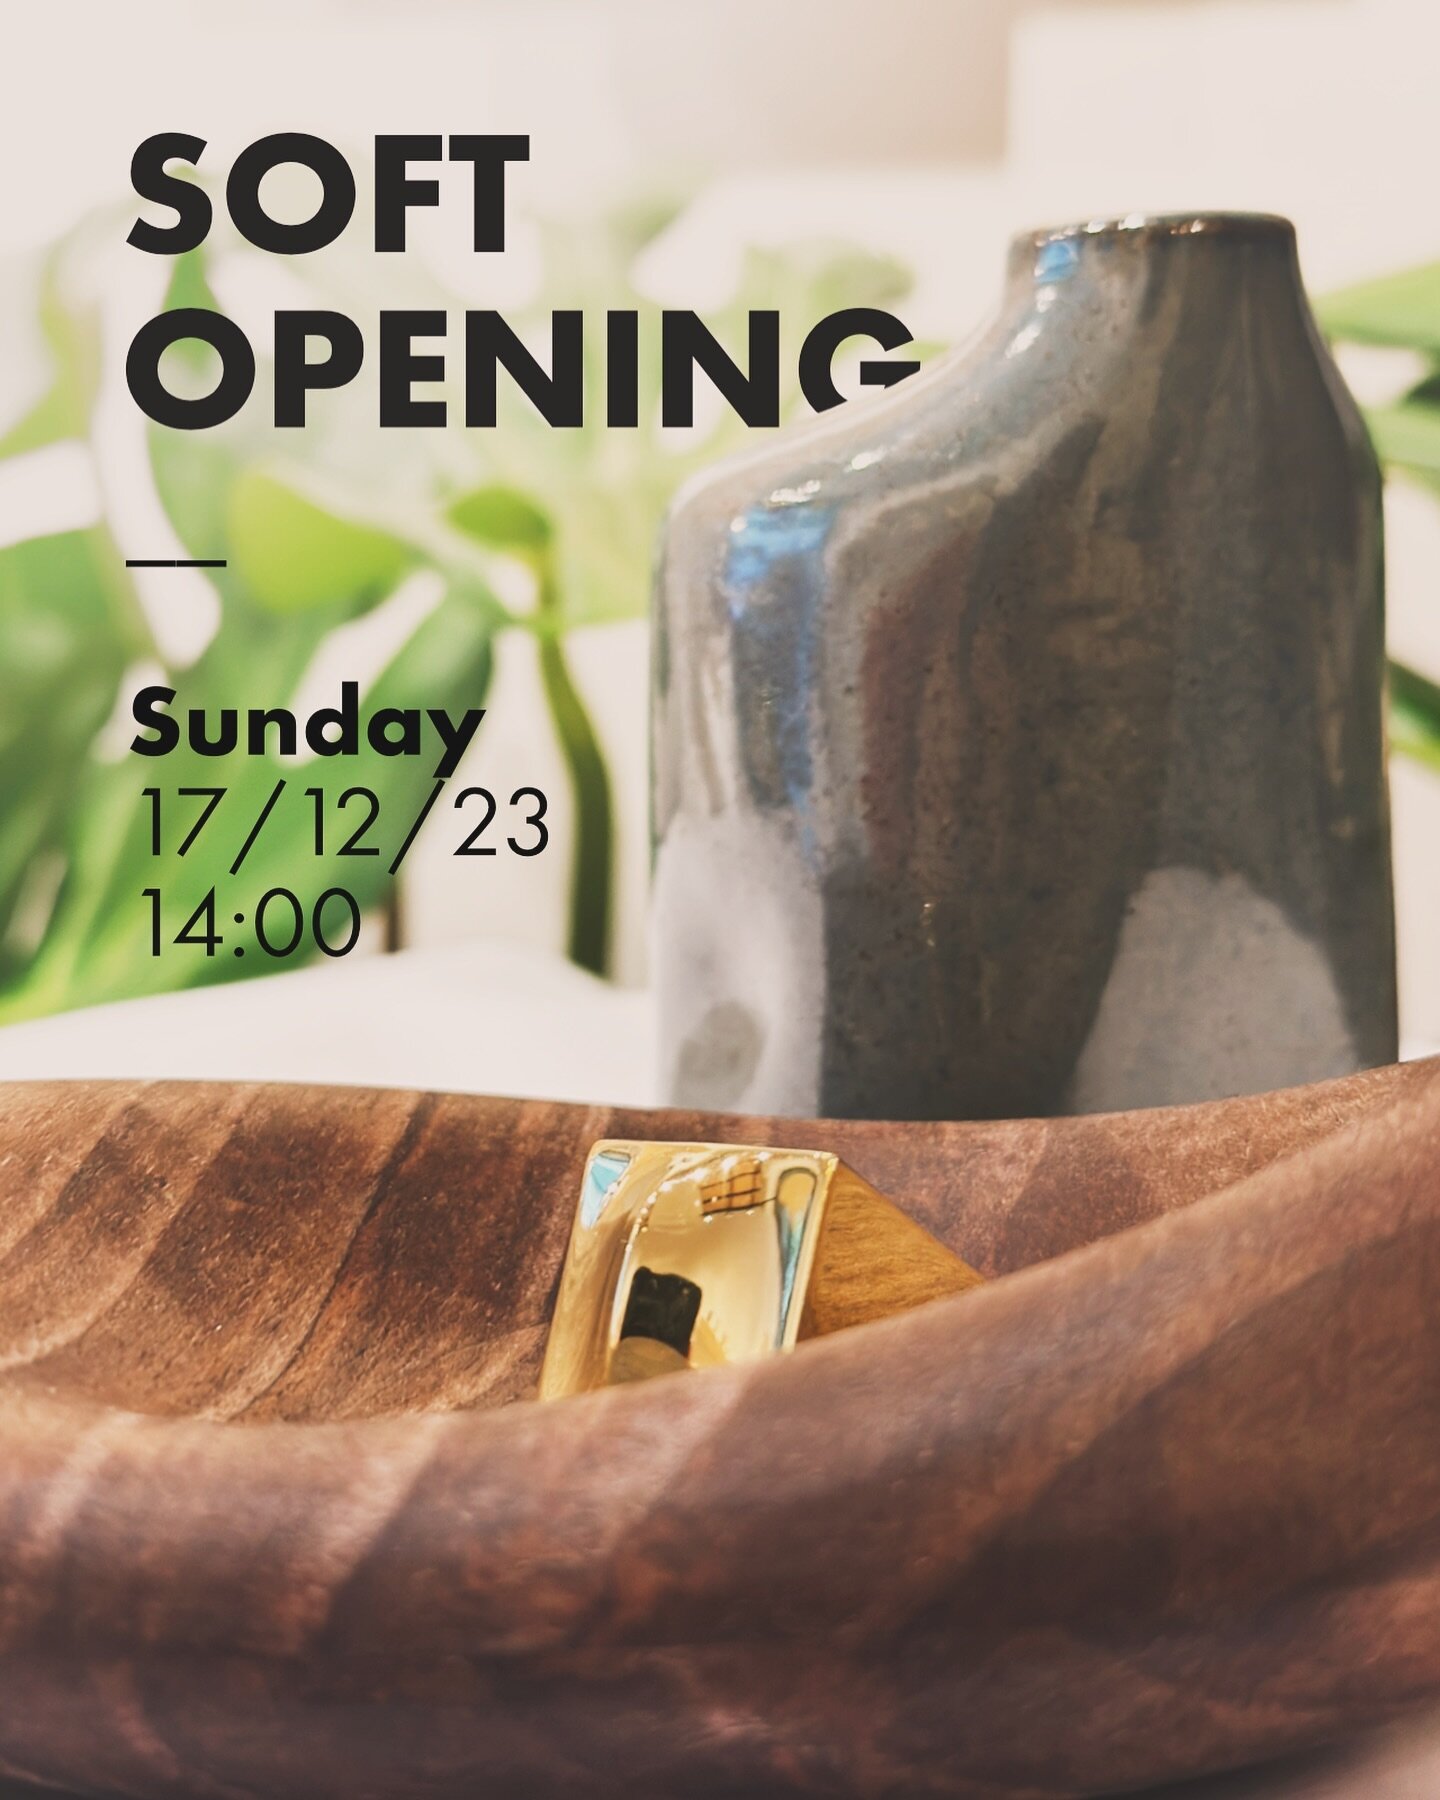 🎉 Join us for the Soft Opening of our Design Studio on Sunday, 17/12/2023, at 14:00, Orfanidou 2, Thessaloniki. 🌟✨ We&rsquo;ve poured our passion into every detail, and we can&rsquo;t wait to share it all with you. Explore creativity, find inspirat